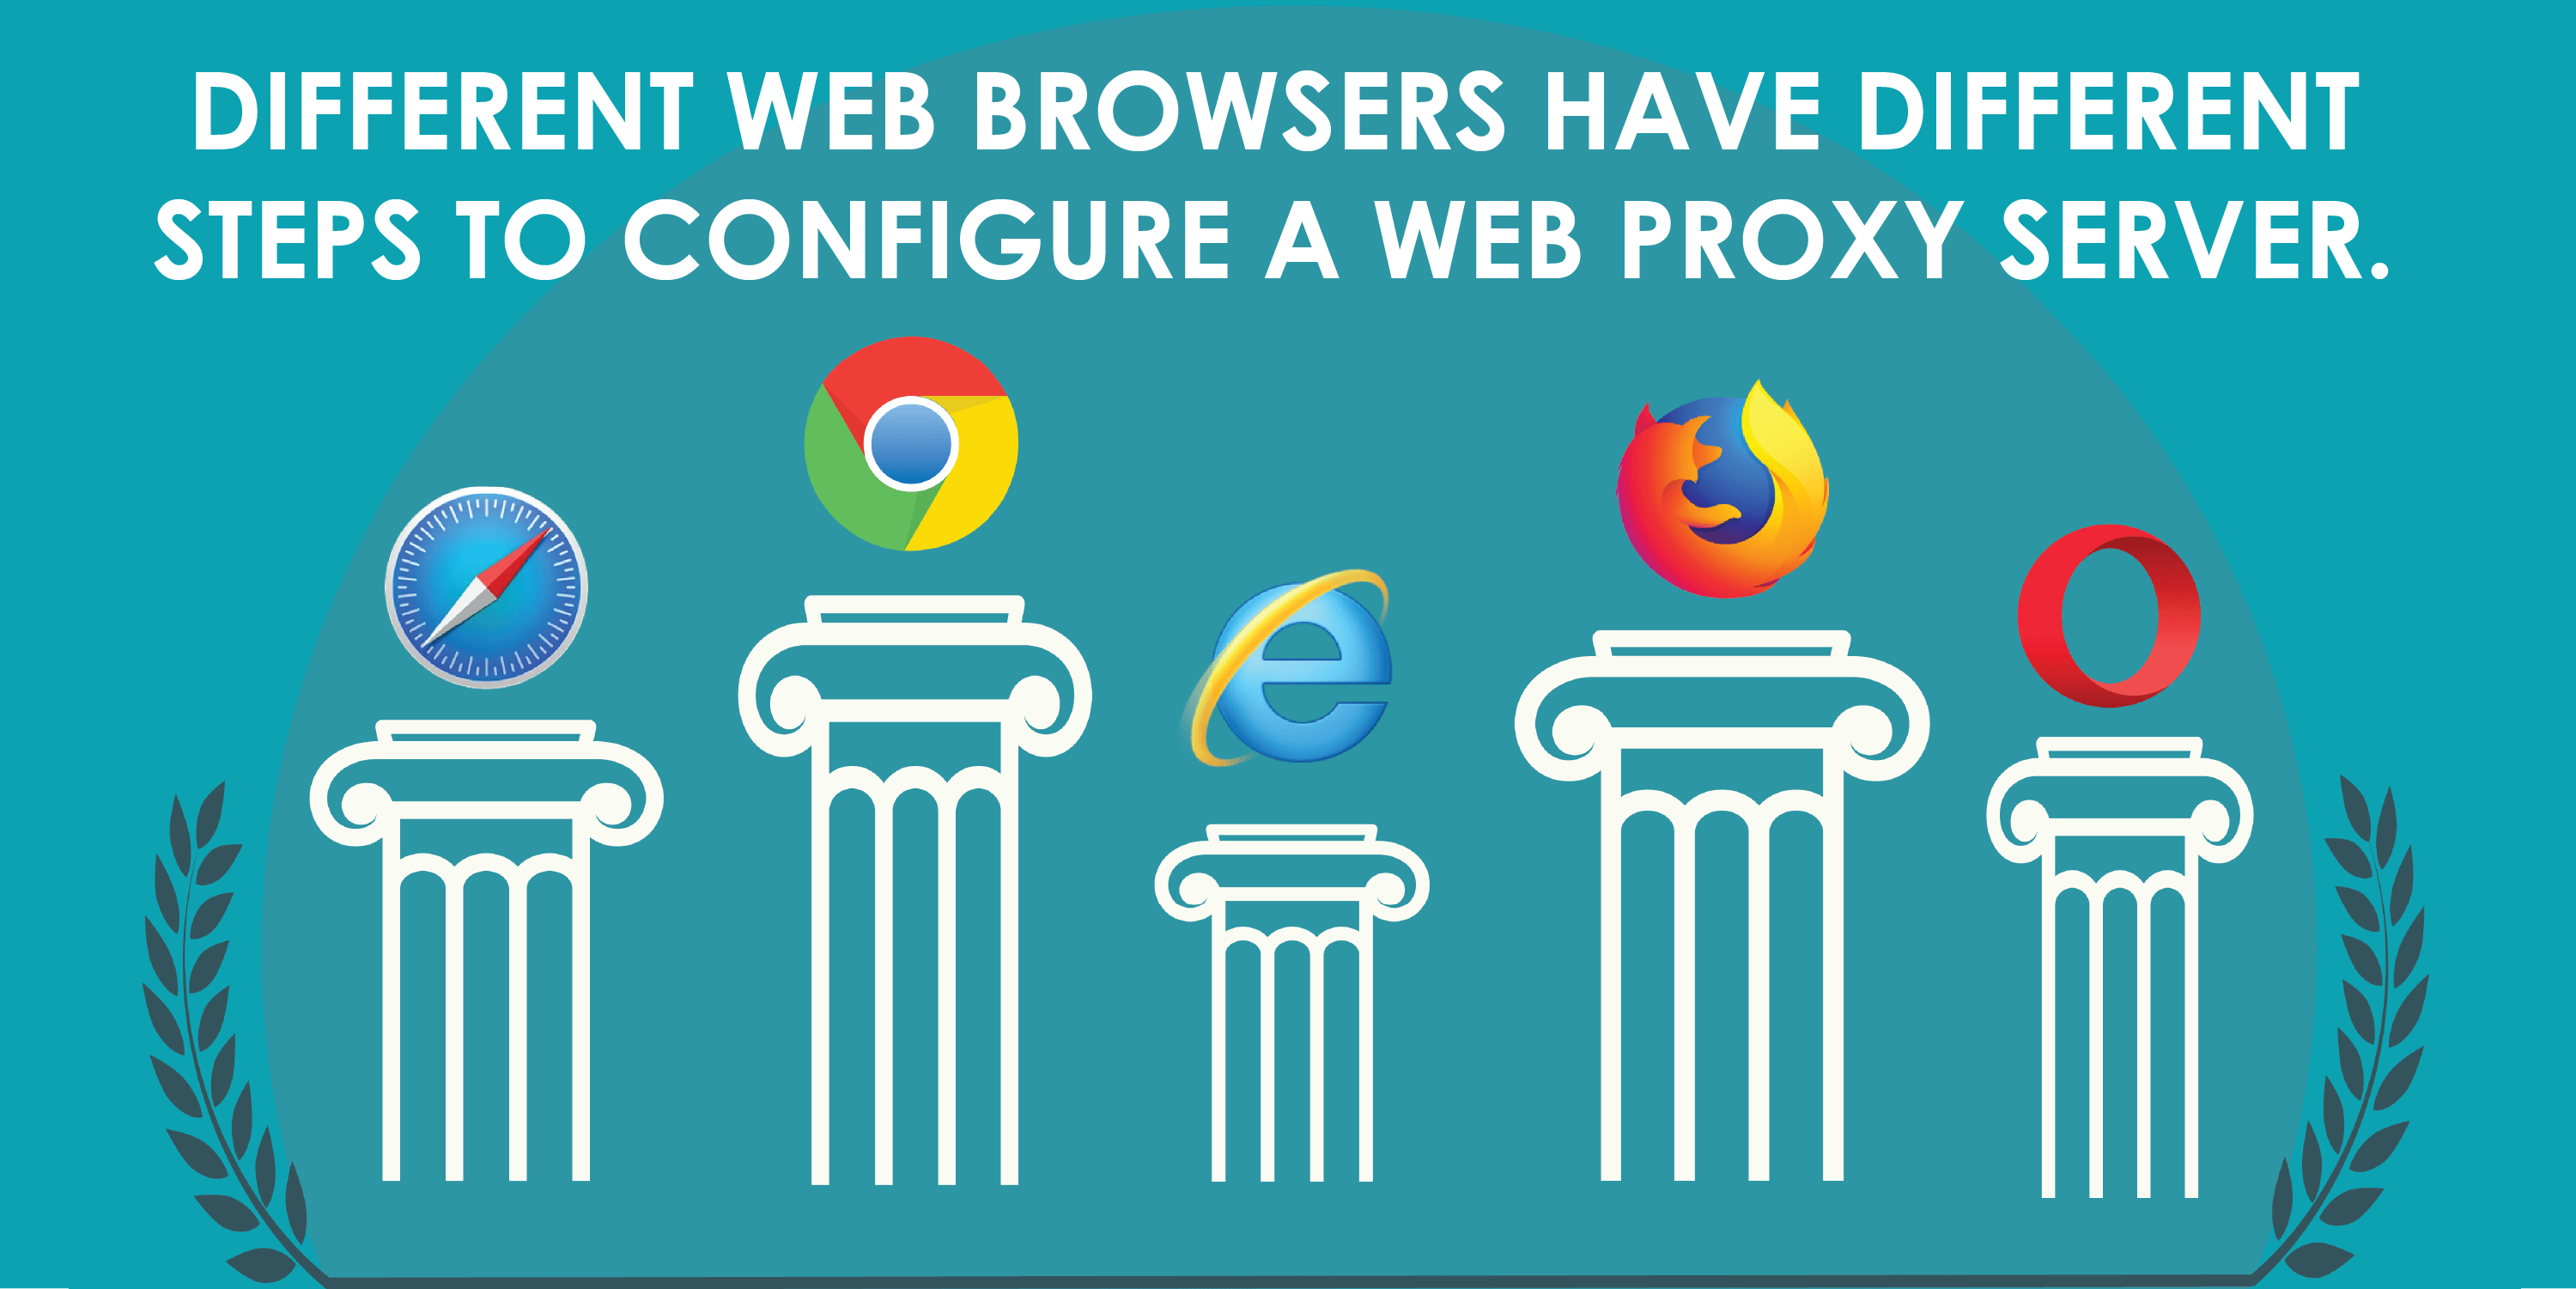 DIFFERENT WEB BROWSERS HAVE DIFFERENT STEPS TO CONFIGURE A WEB PROXY SERVER.